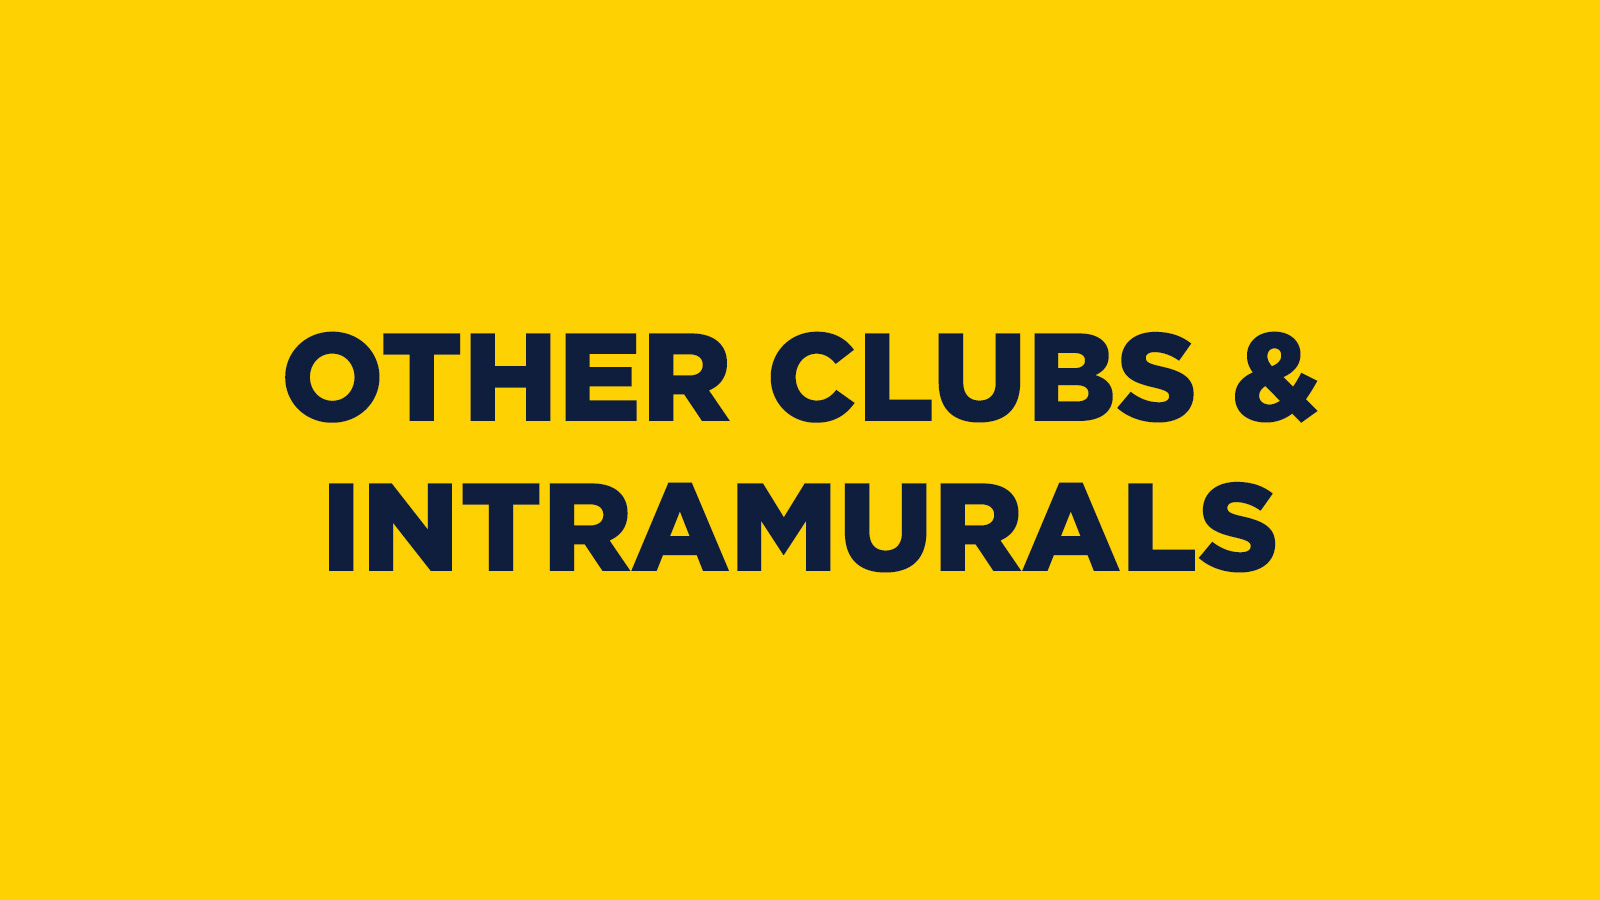 OTHER CLUBS & INTRAMURALS